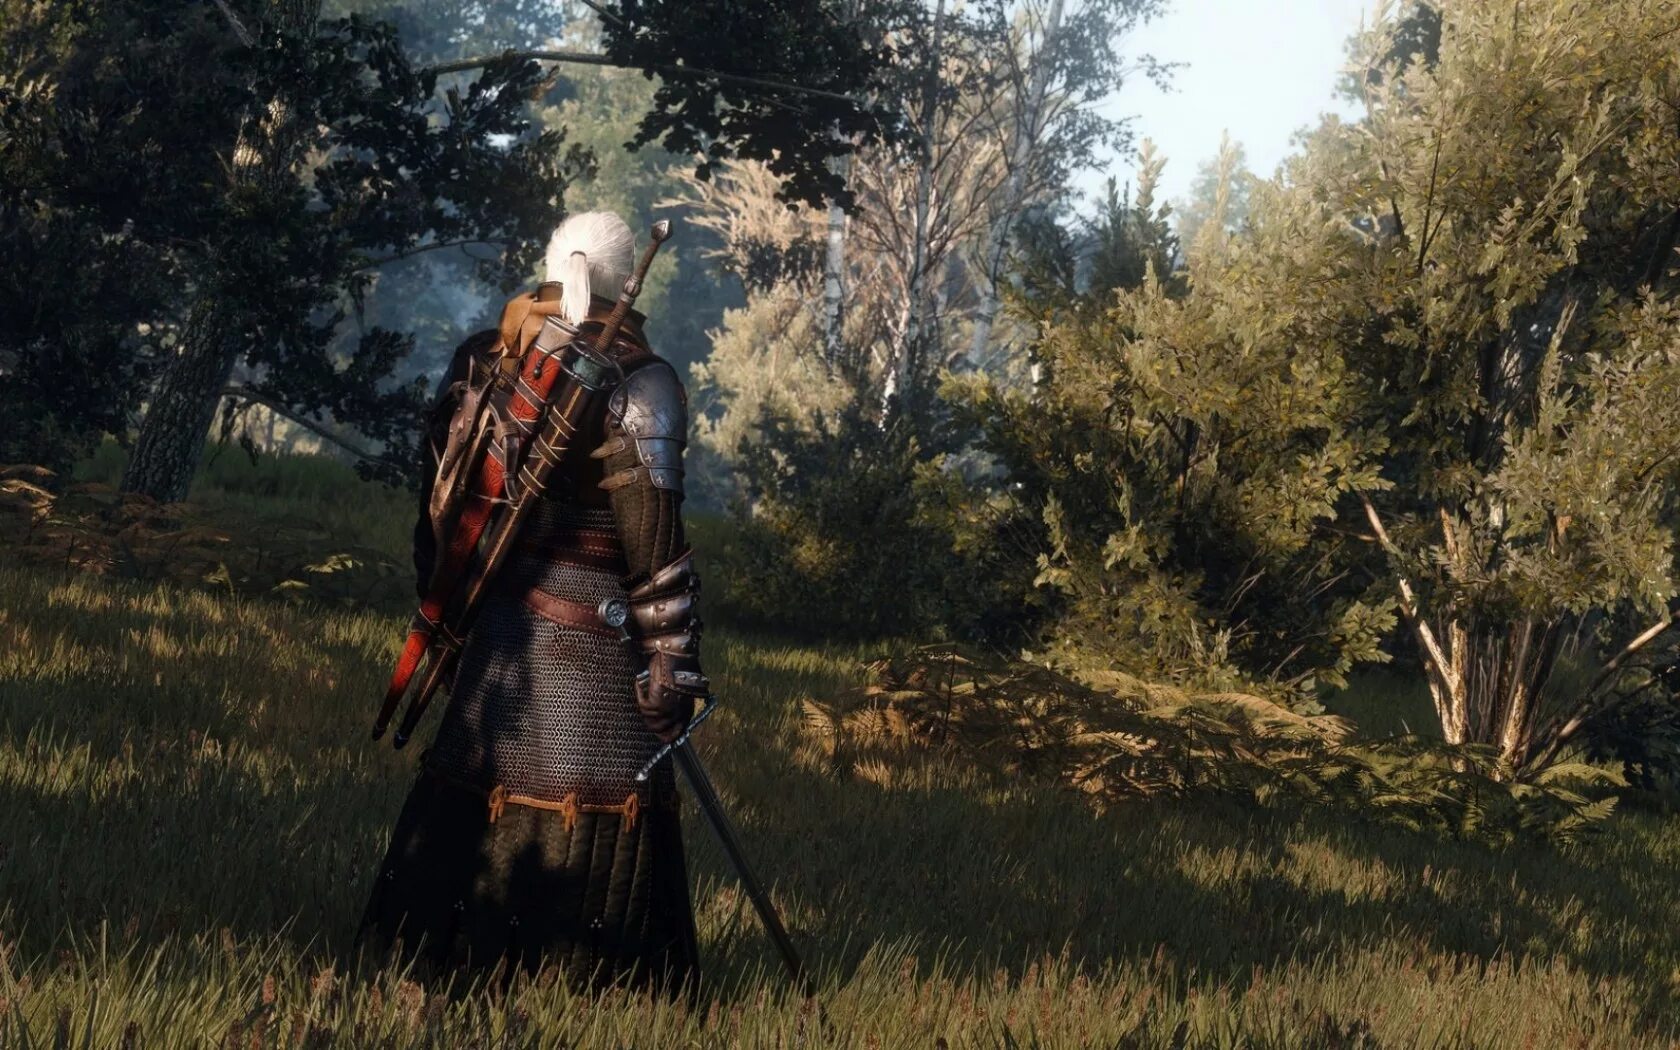 Witcher 3. The Witcher 3 Дикая охота. The Witcher 3: Wild Hunt (Ведьмак 3).